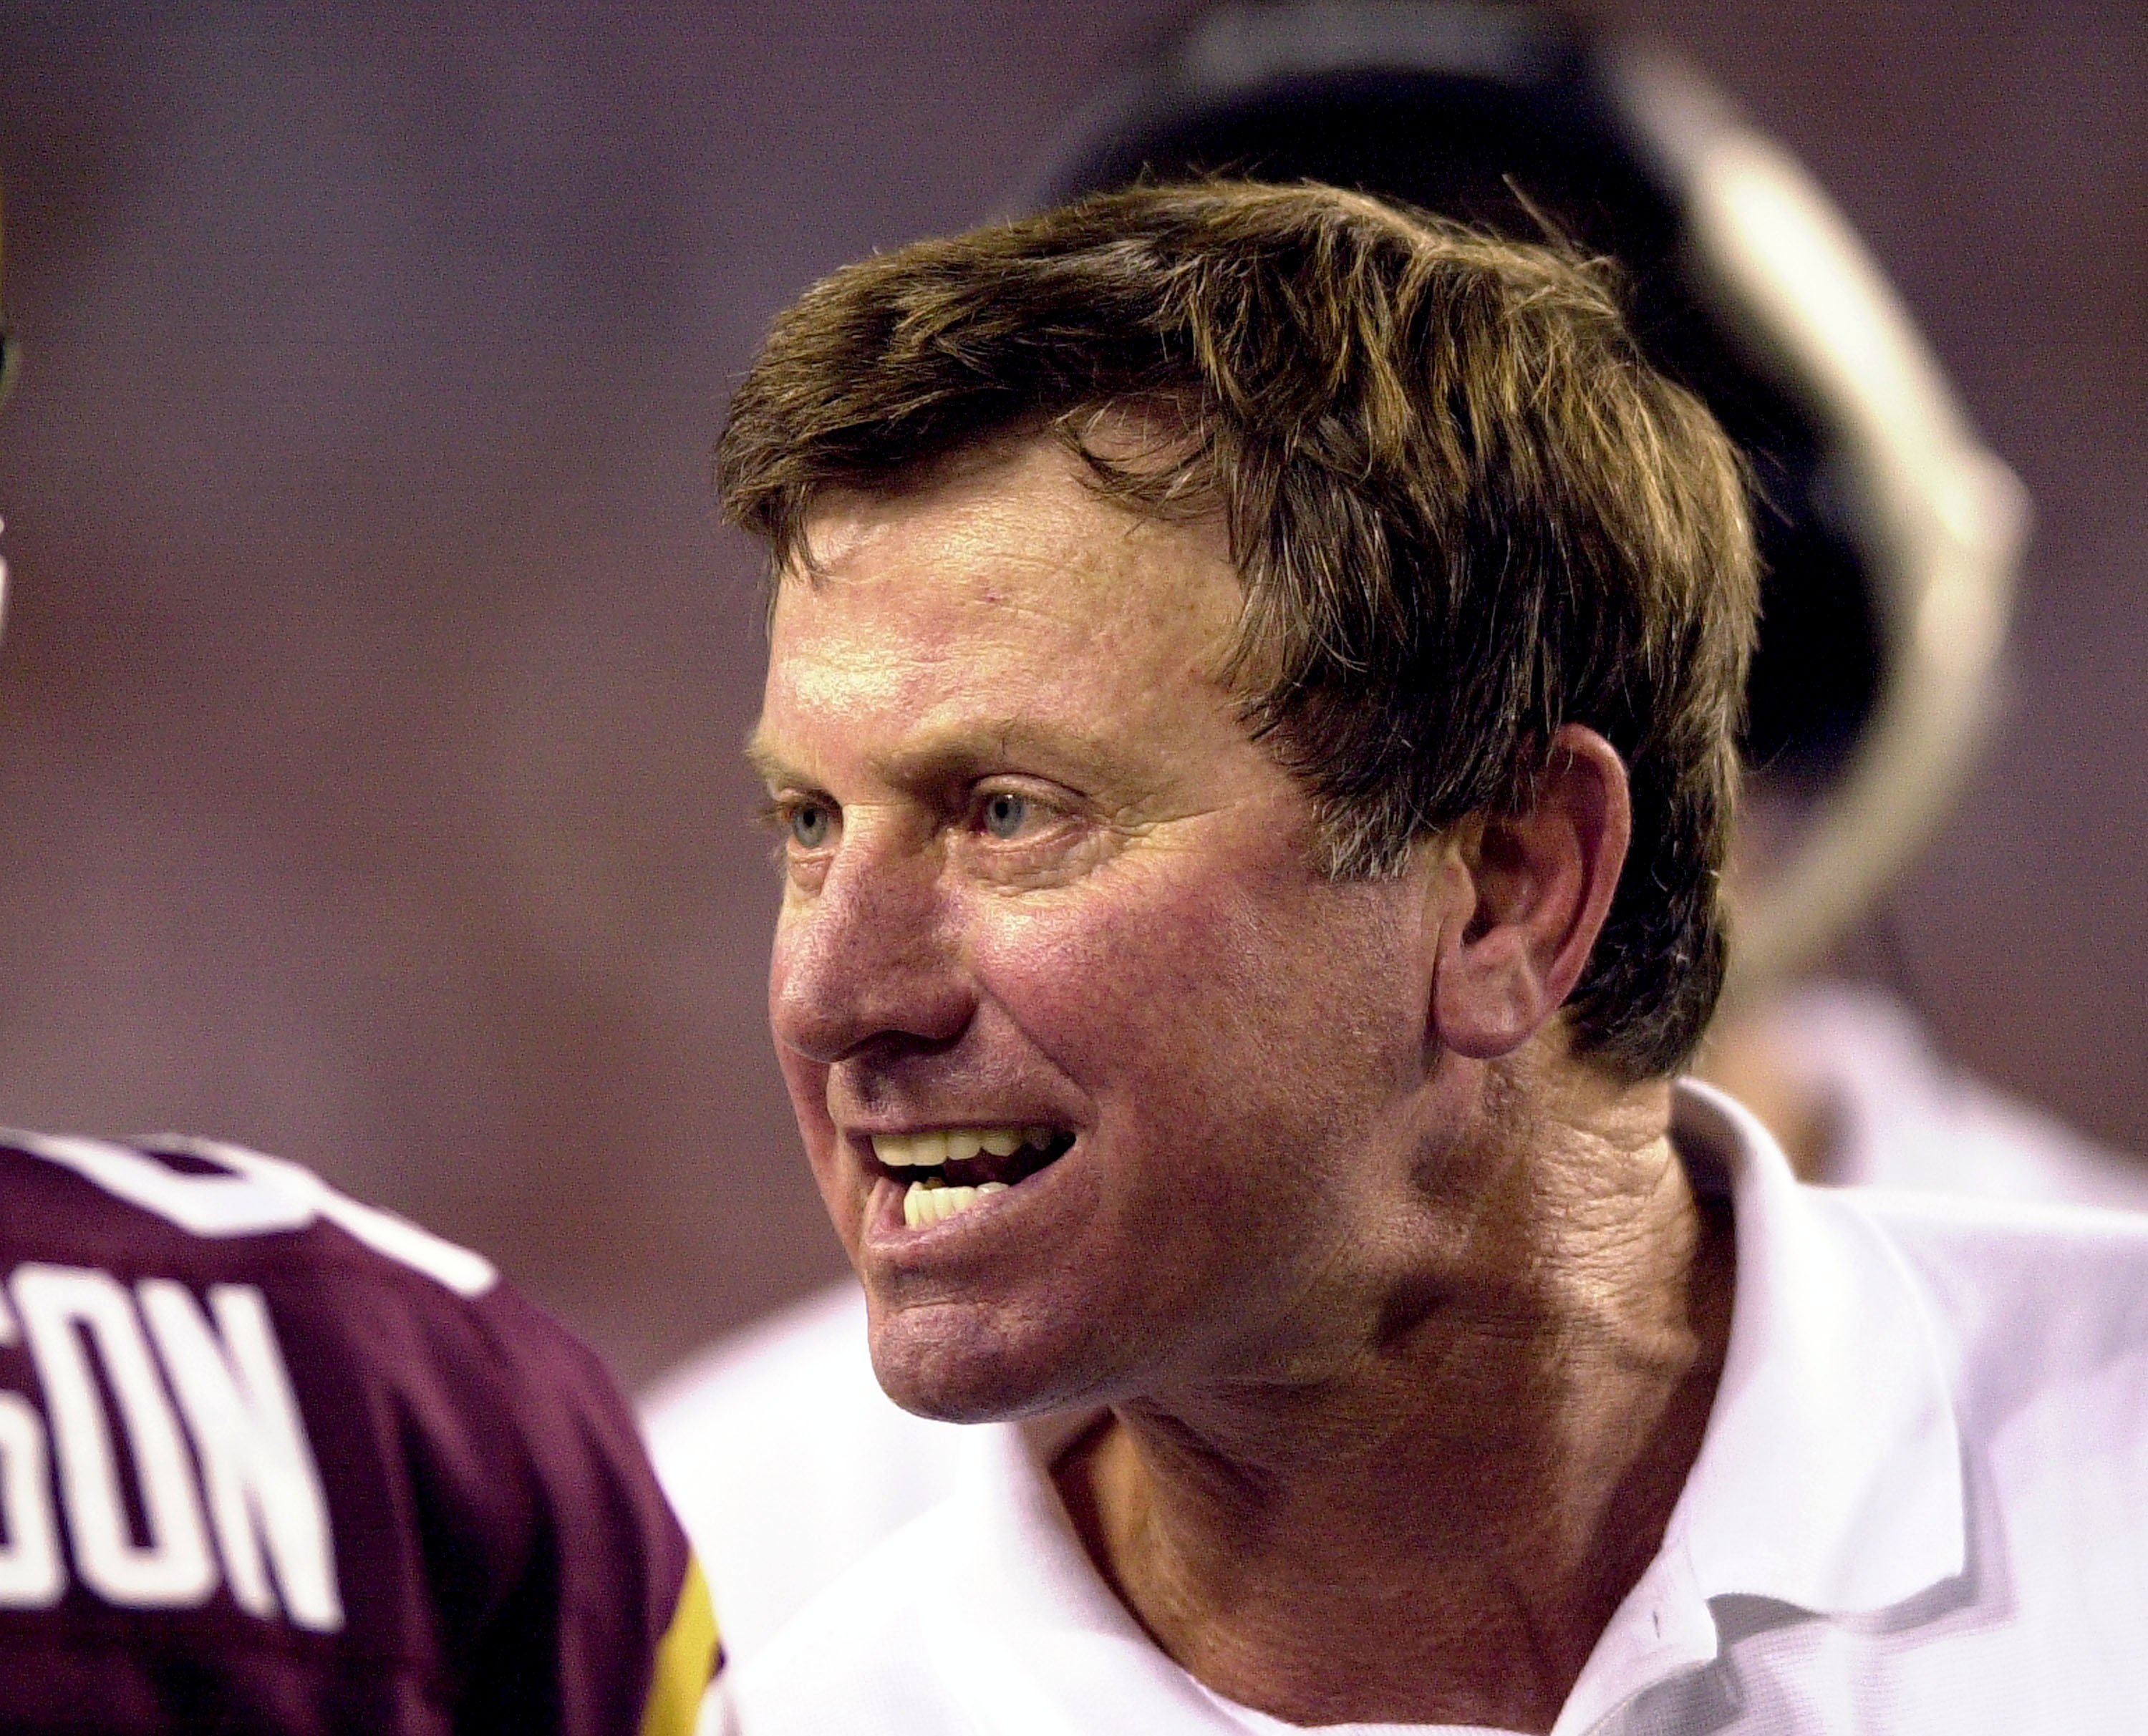 Washington Redskins coach Steve Spurrier on the sidelines at Raymond James Stadium, Tampa, Florida, August 8, 2002.  (Photo by Al Messerschmidt/Getty Images)